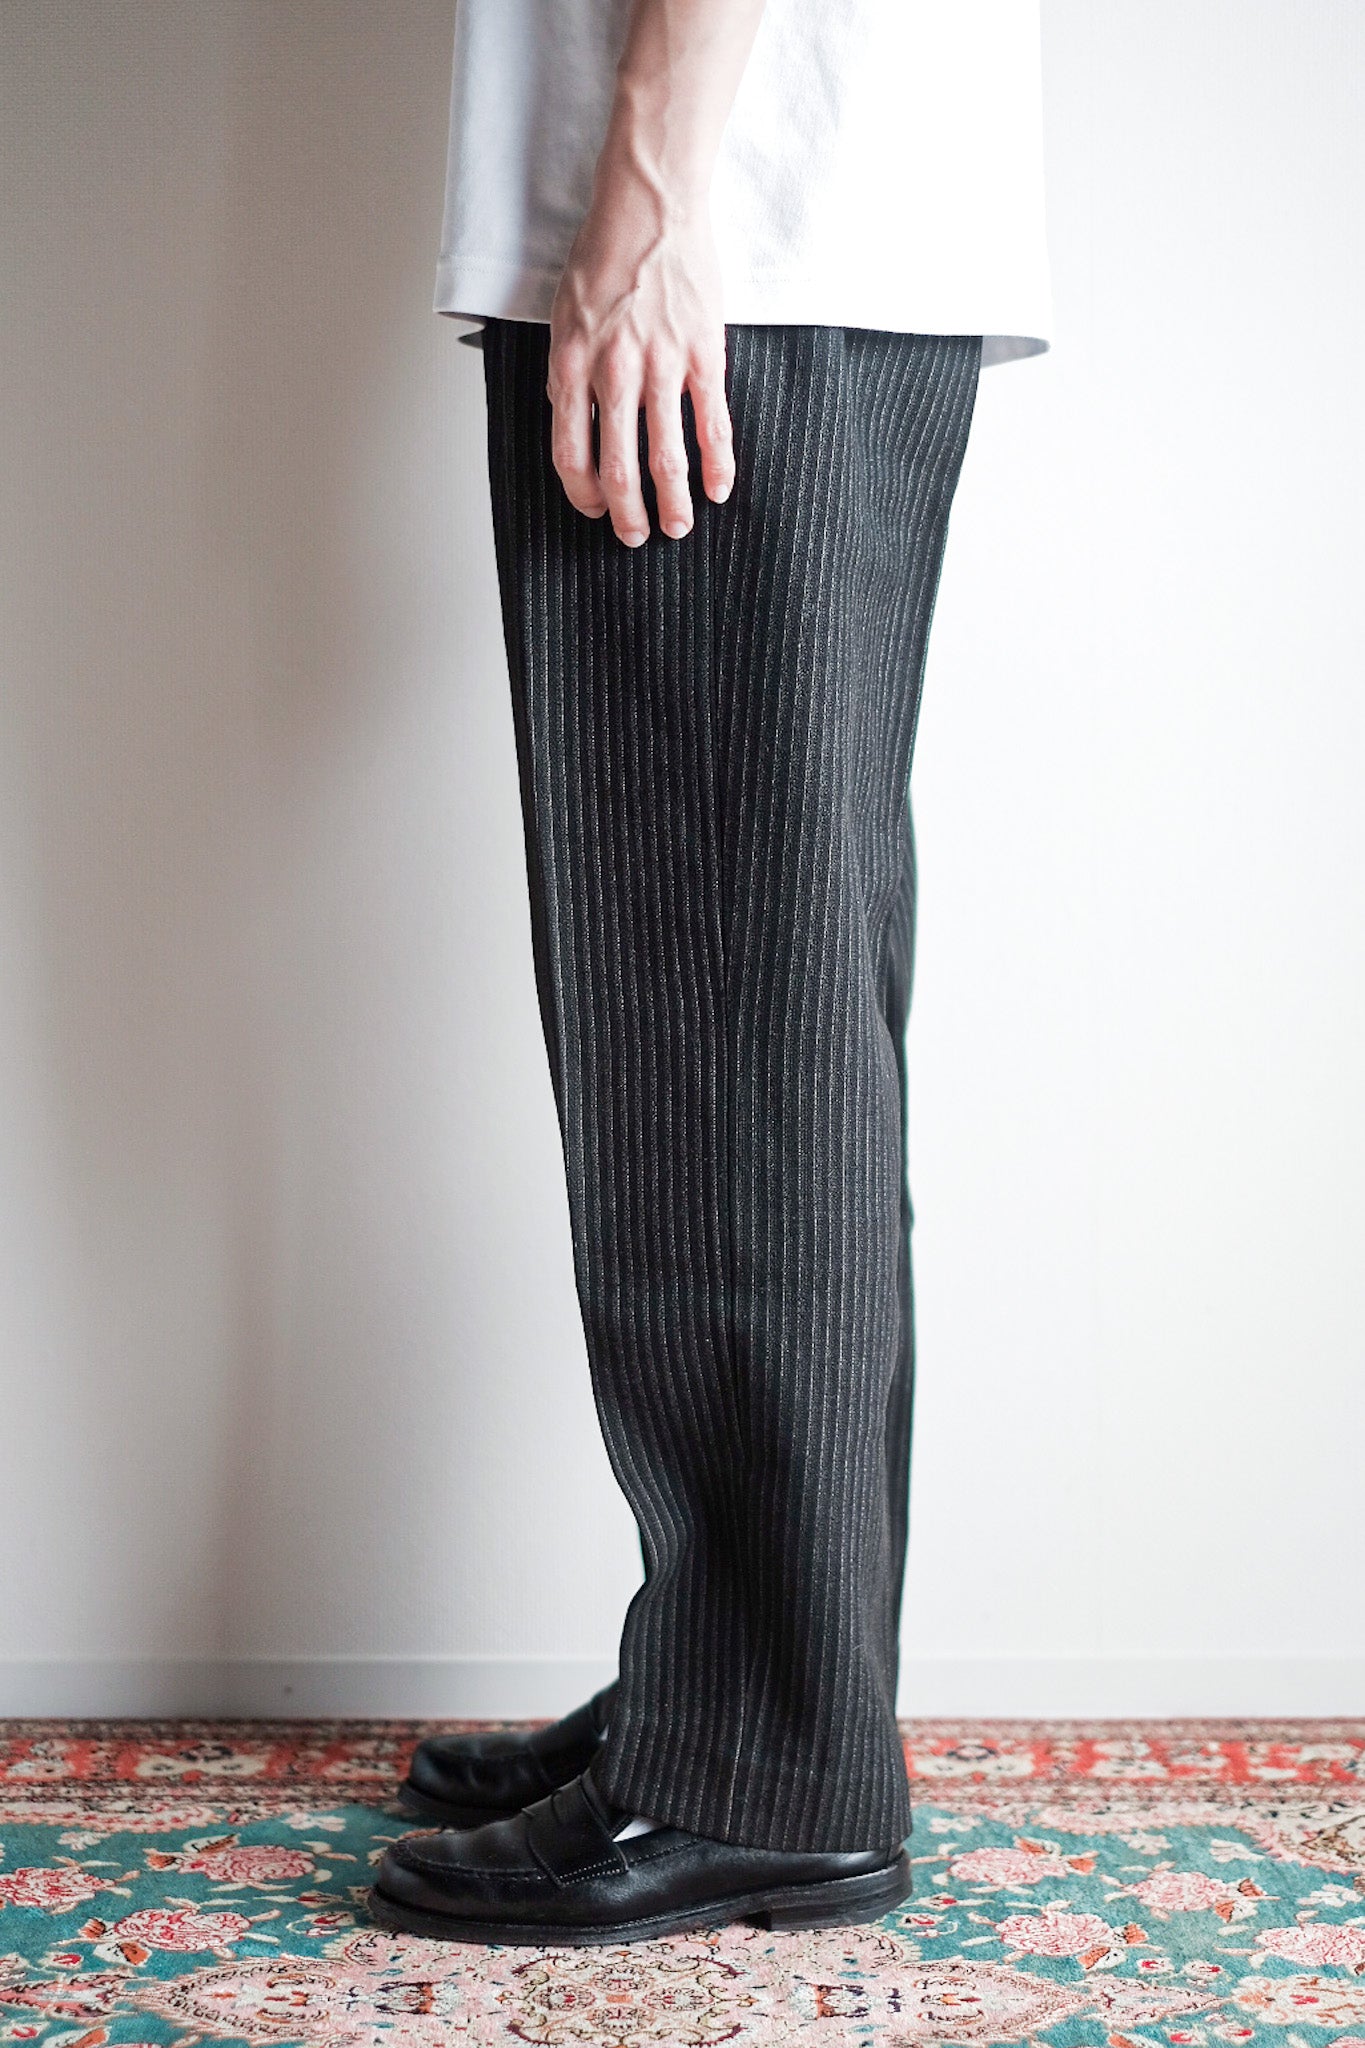 [~ 30's] French Vintage Wool Striped Work Pants